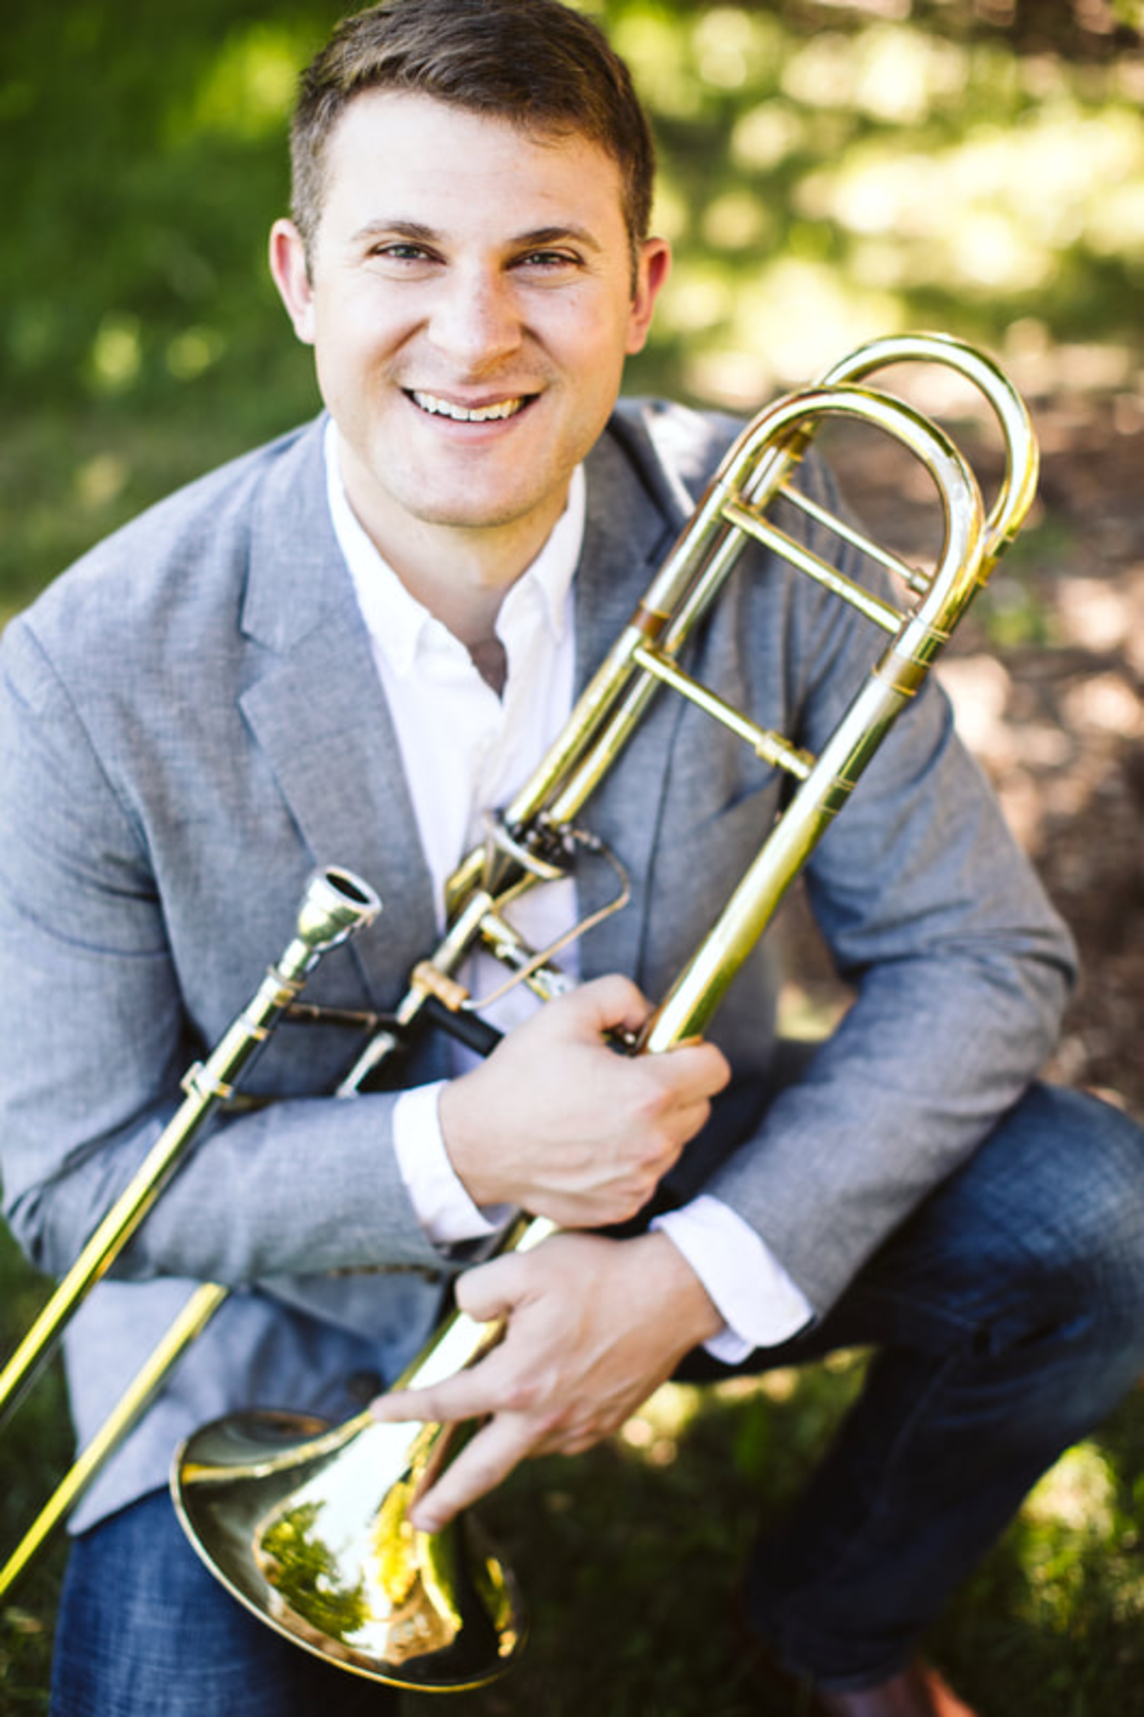 Headshot of featured musician Corey Sansolo, posing with his trombone.